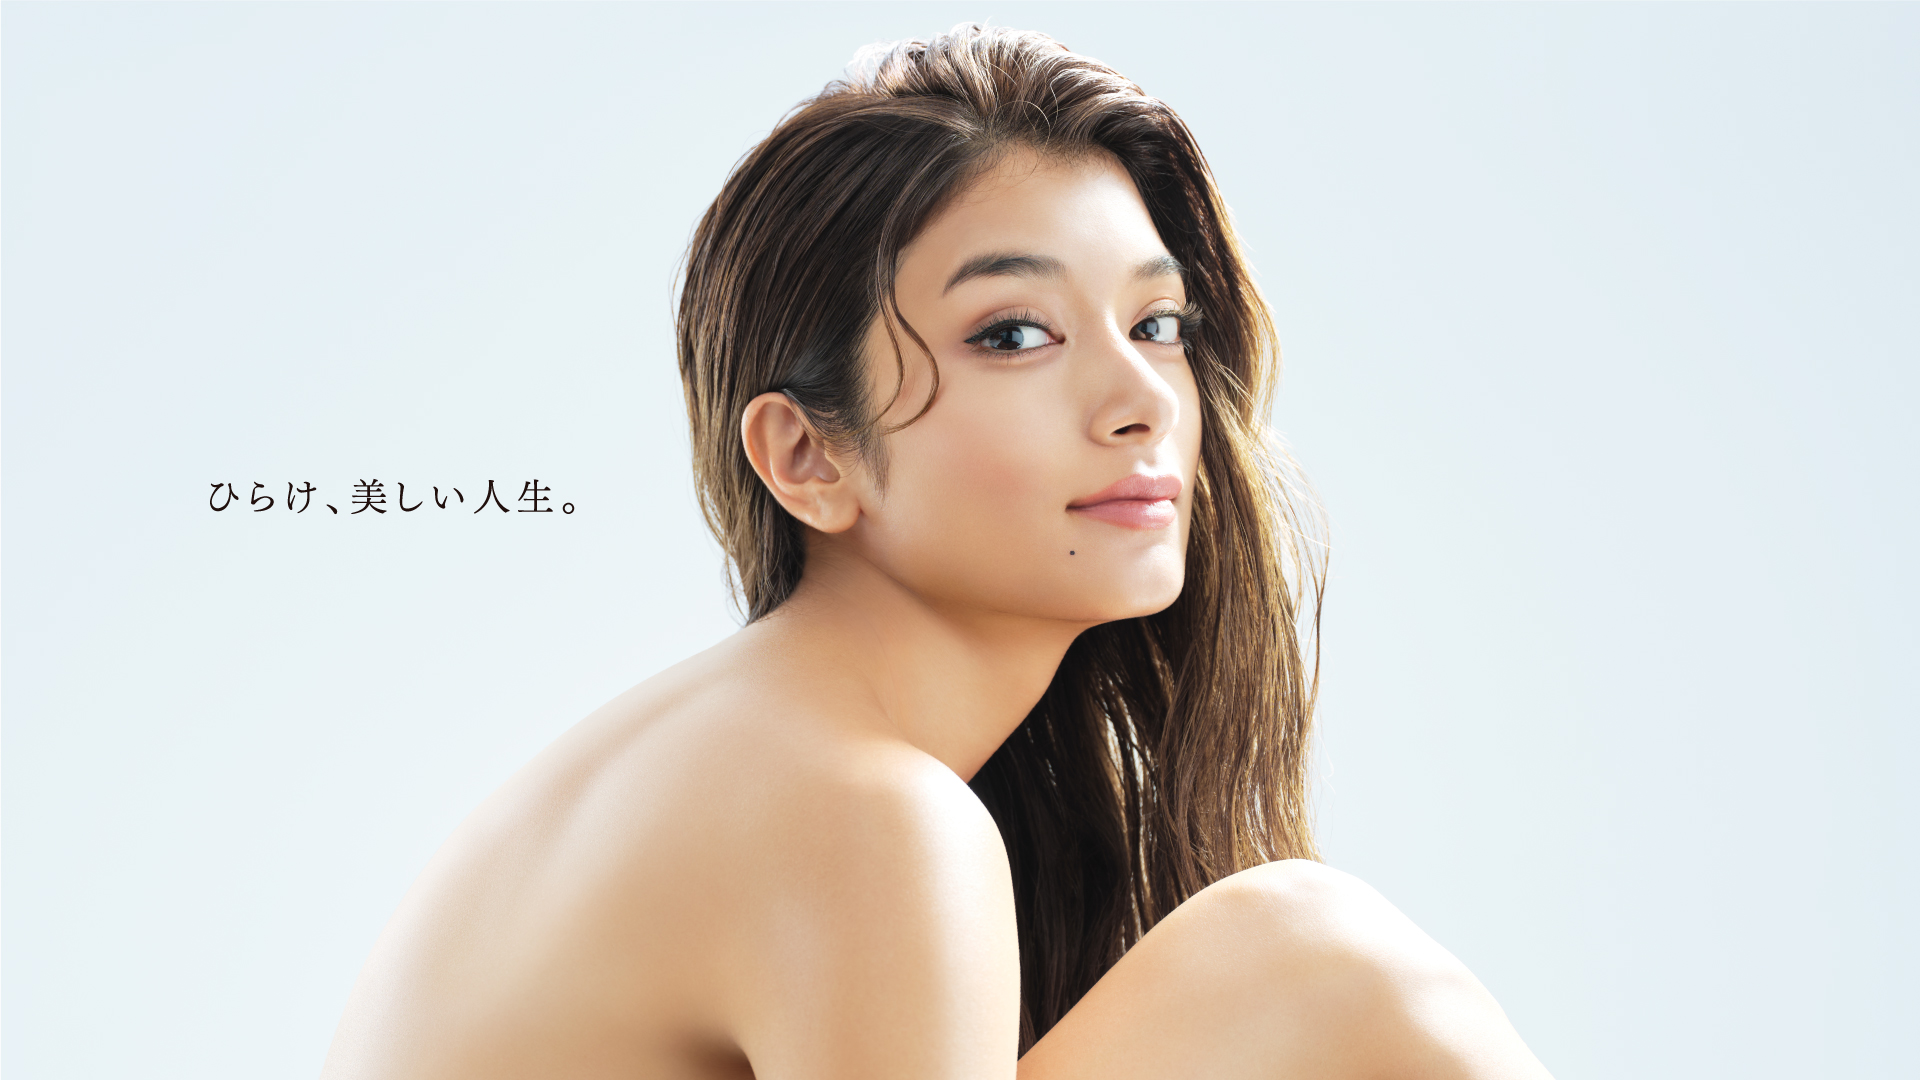 MYTREX 公式 アンバサダー ローラ 就任。Rola has become official ambassador for MYTREX.